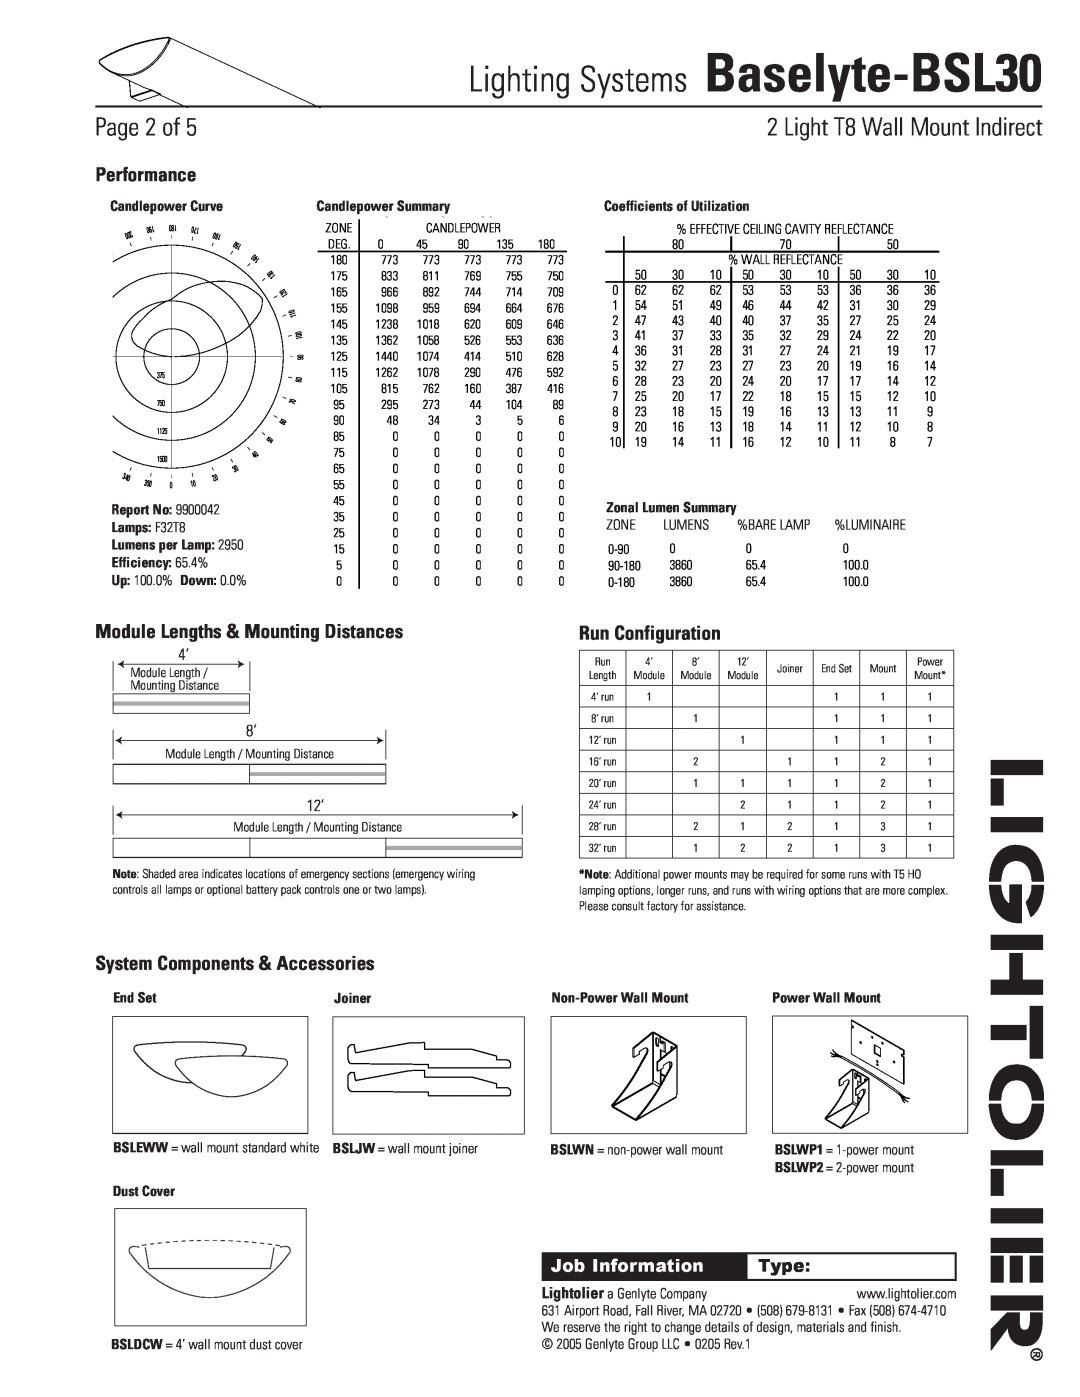 Lightolier Lighting Systems Baselyte-BSL30, Page of, Performance, Module Lengths & Mounting Distances, Type, End Set 